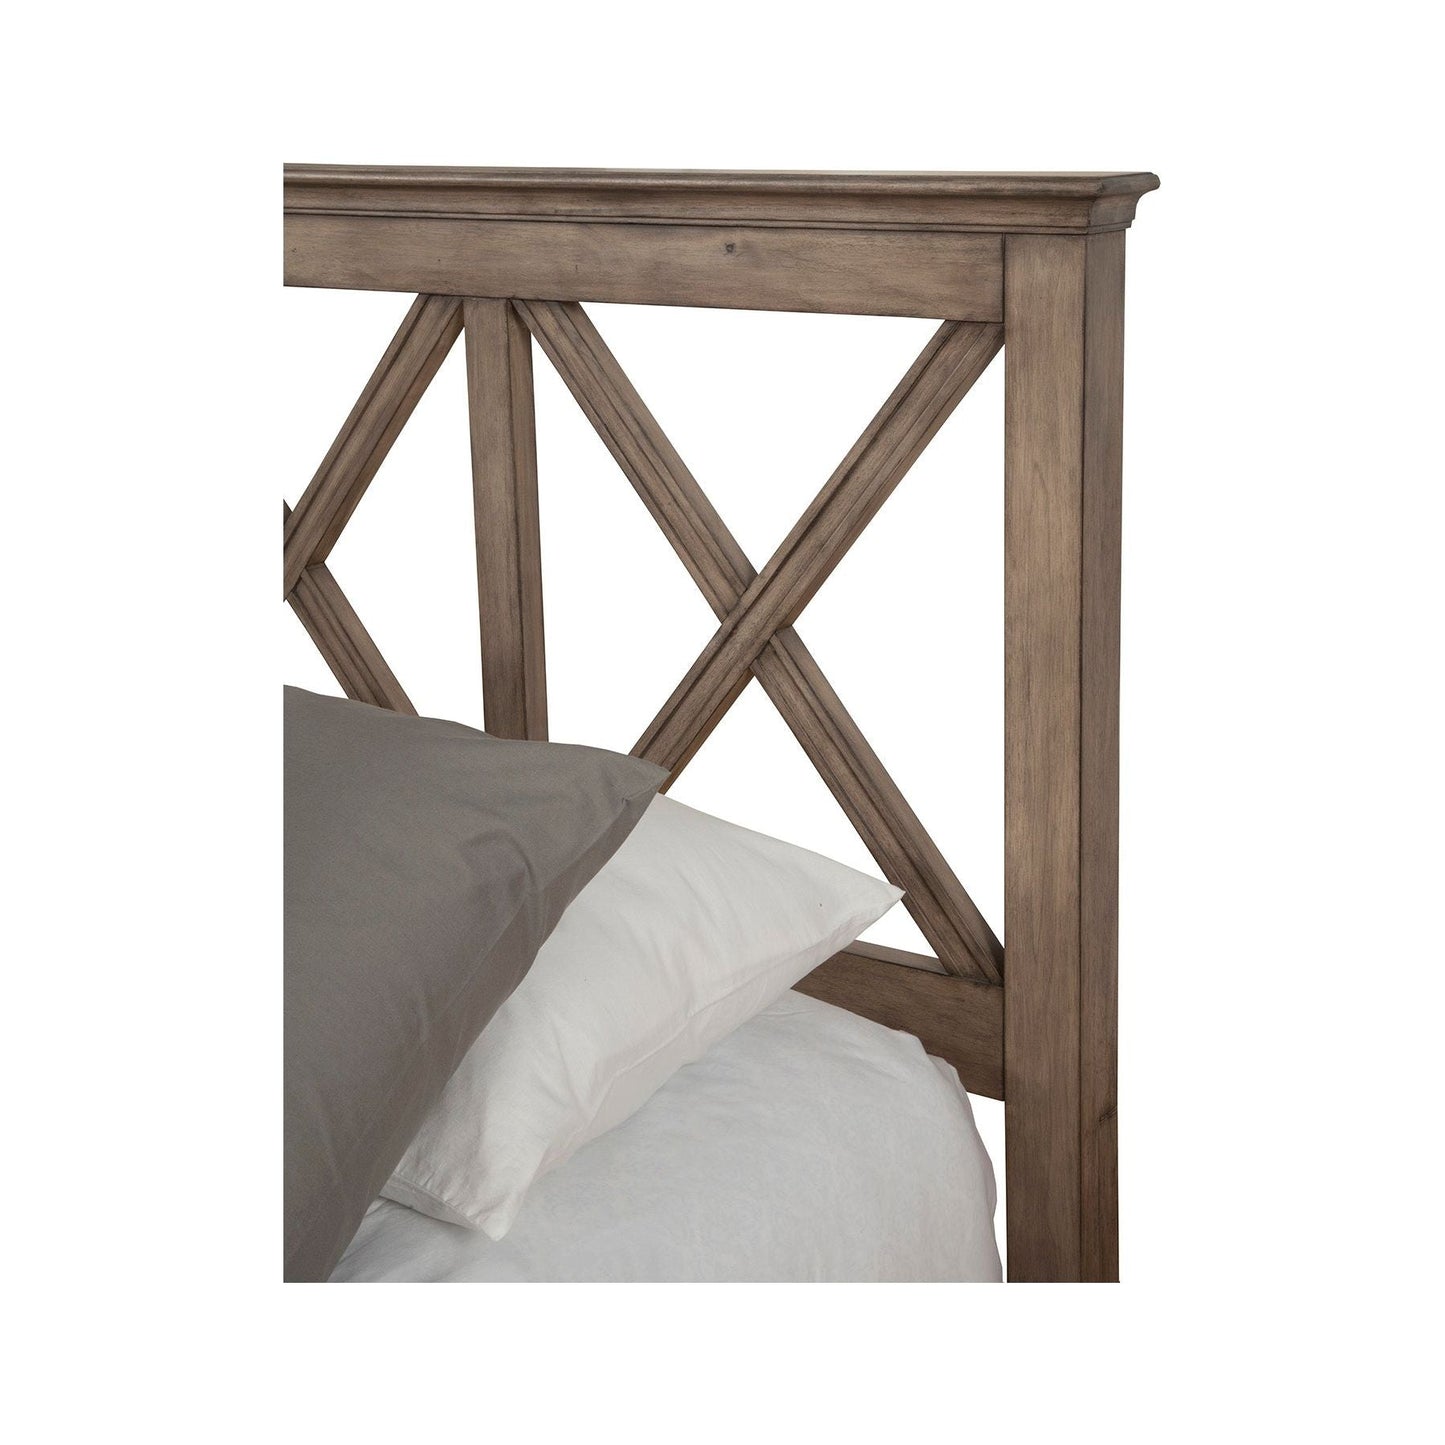 Potter Bed, French Truffle - Alpine Furniture